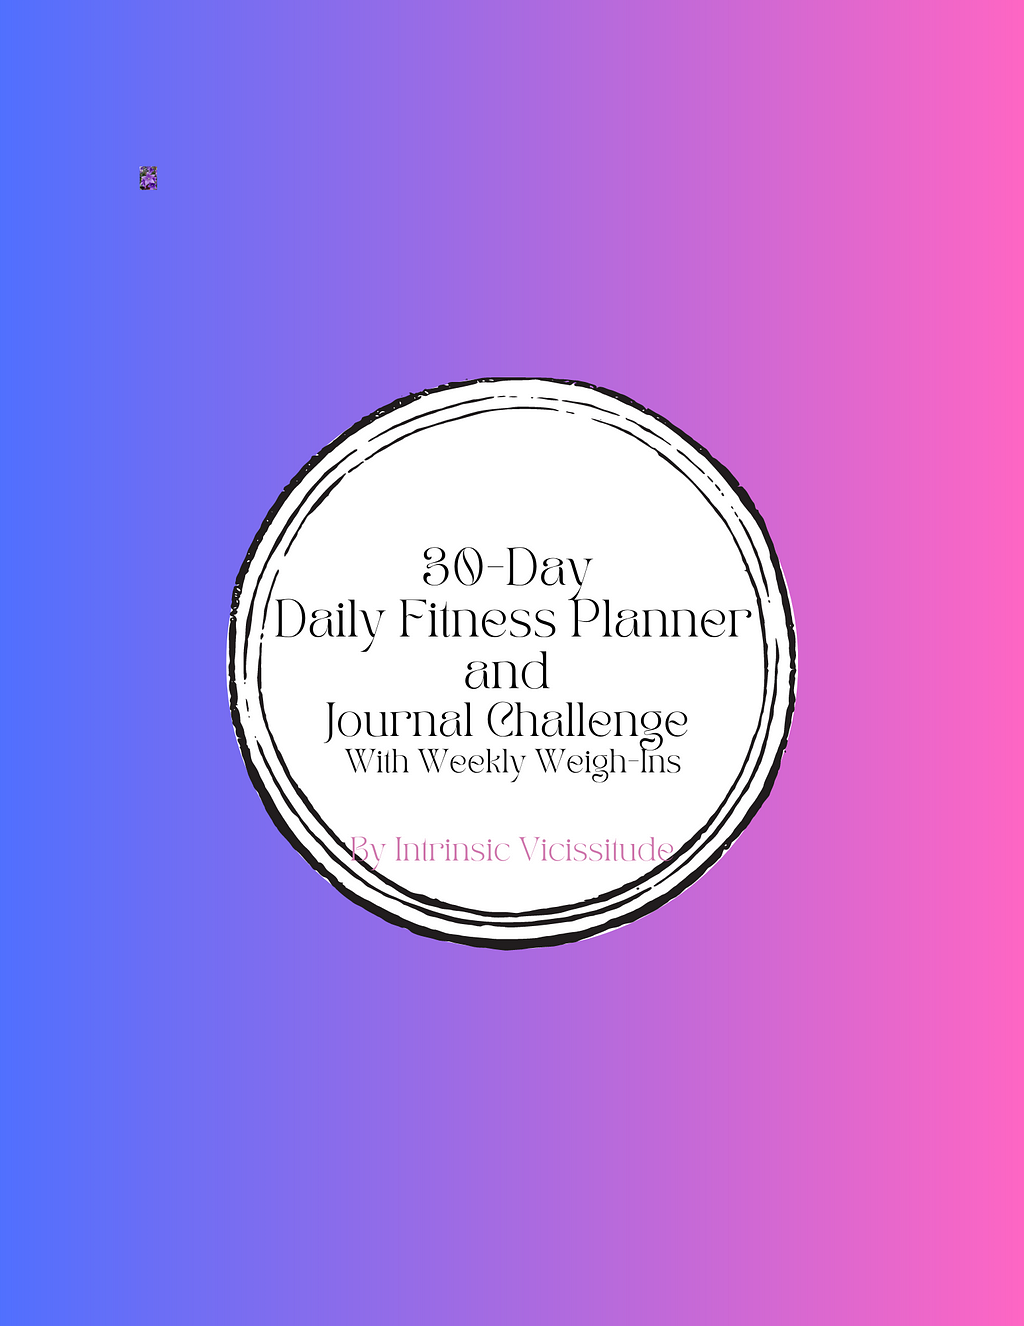 Cover of the 30-Day Fitness Planner and Journaling Challenge with Weekly Weigh-Ins from Intrinsic VIcissitude